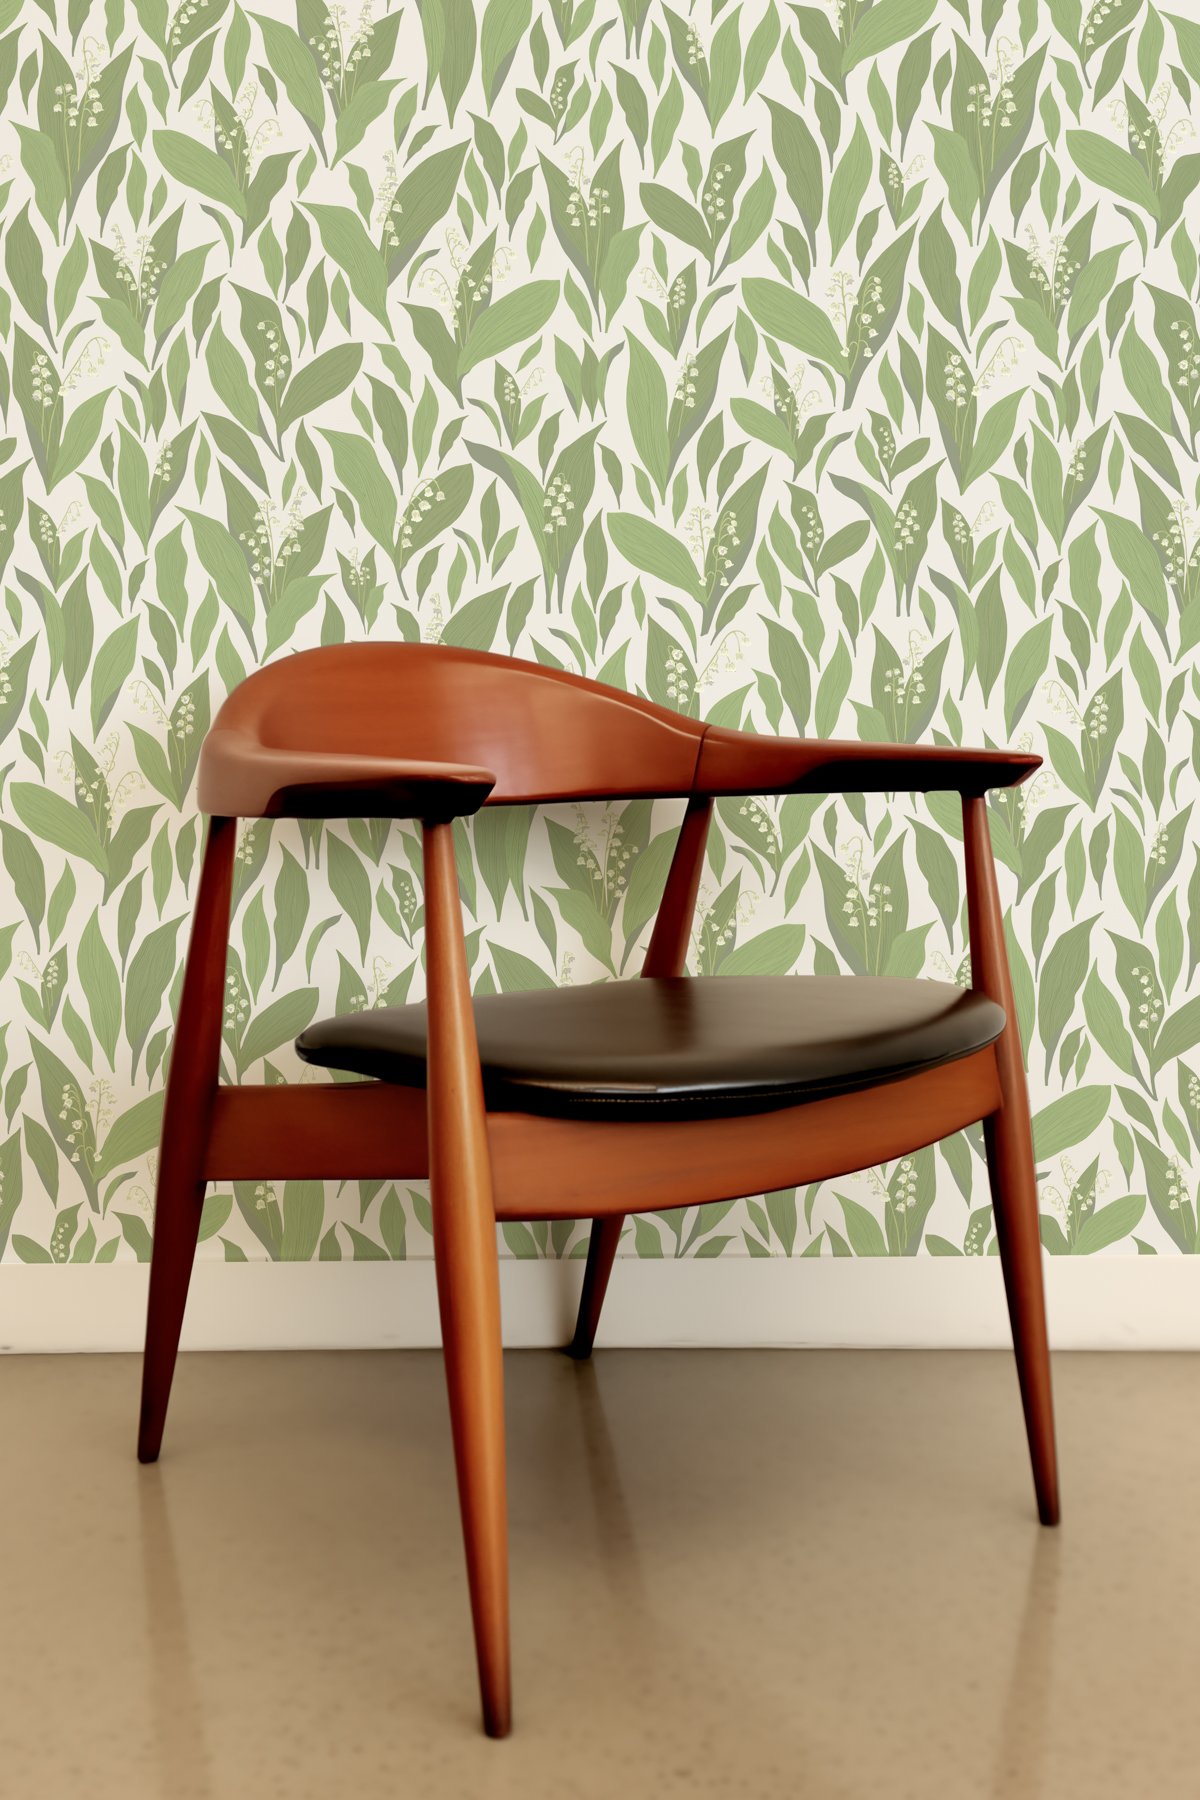 Kate Golding Lily of the Valley Wallpaper.  Modern wallcoverings and interior decor. 